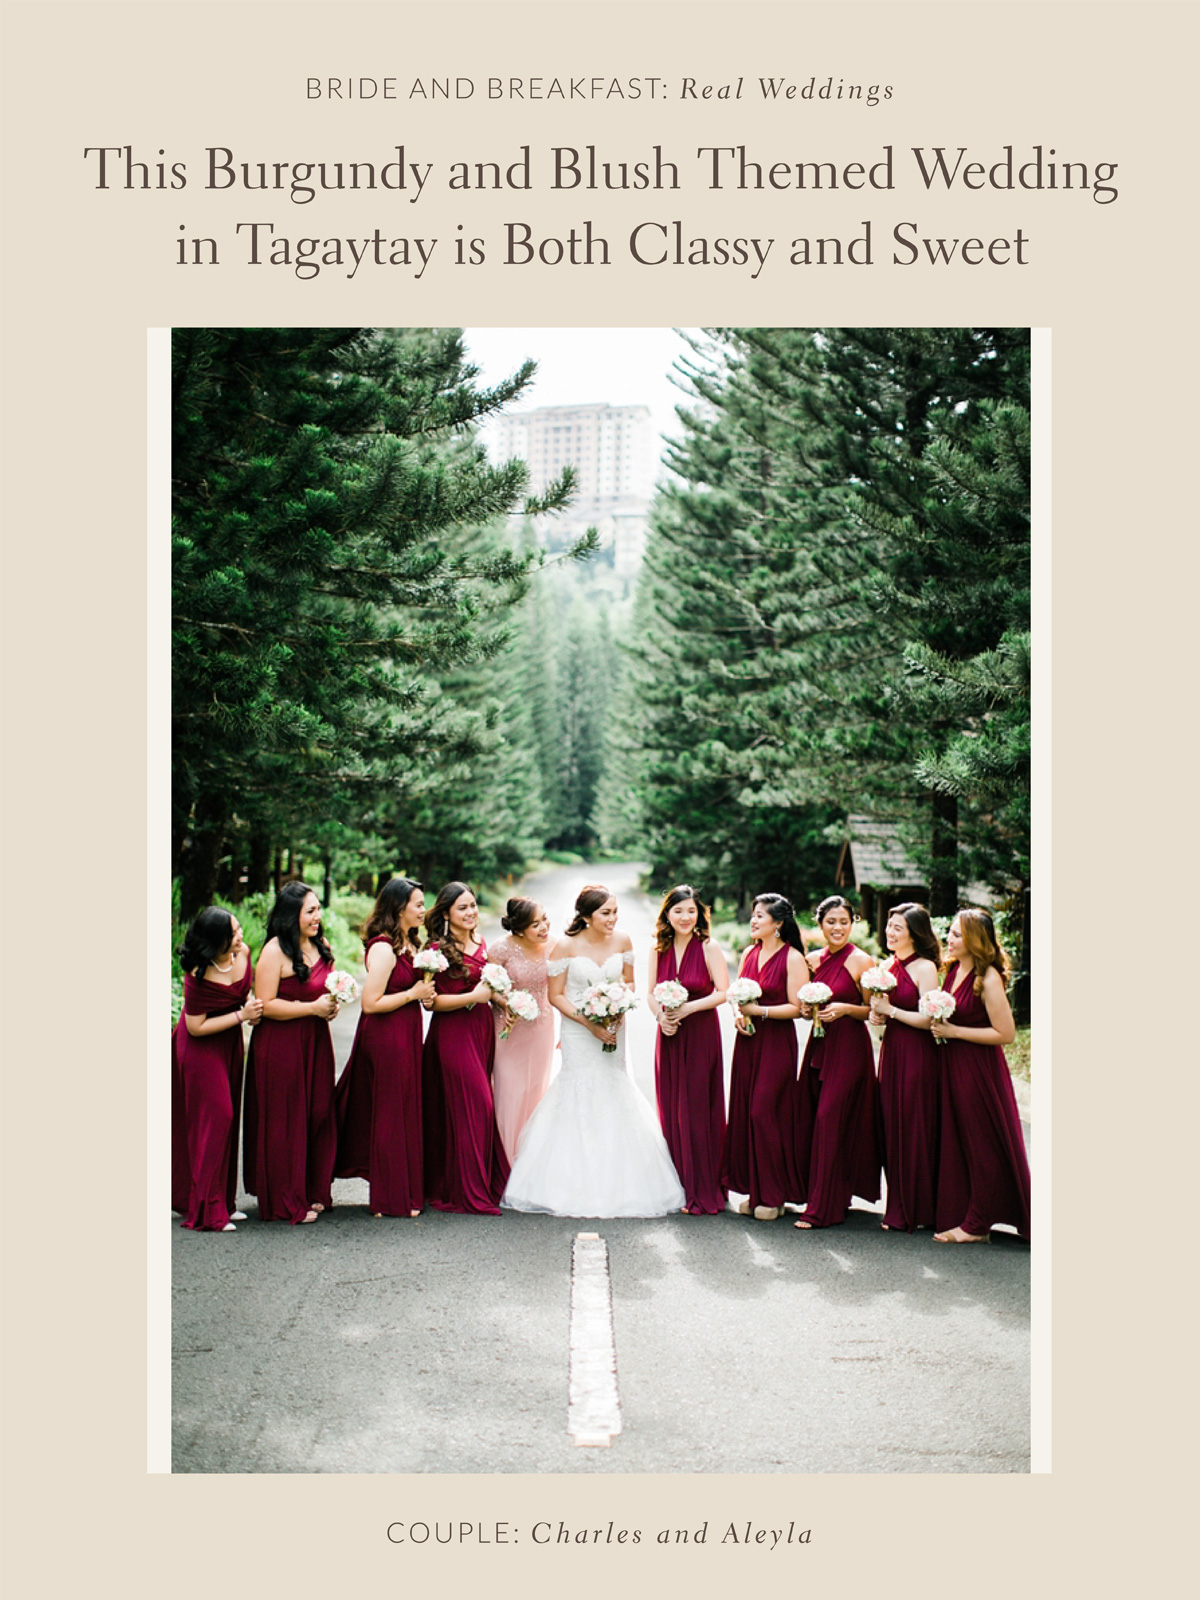 This Burgundy and Blush Themed Wedding in Tagaytay is Both Classy and Sweet